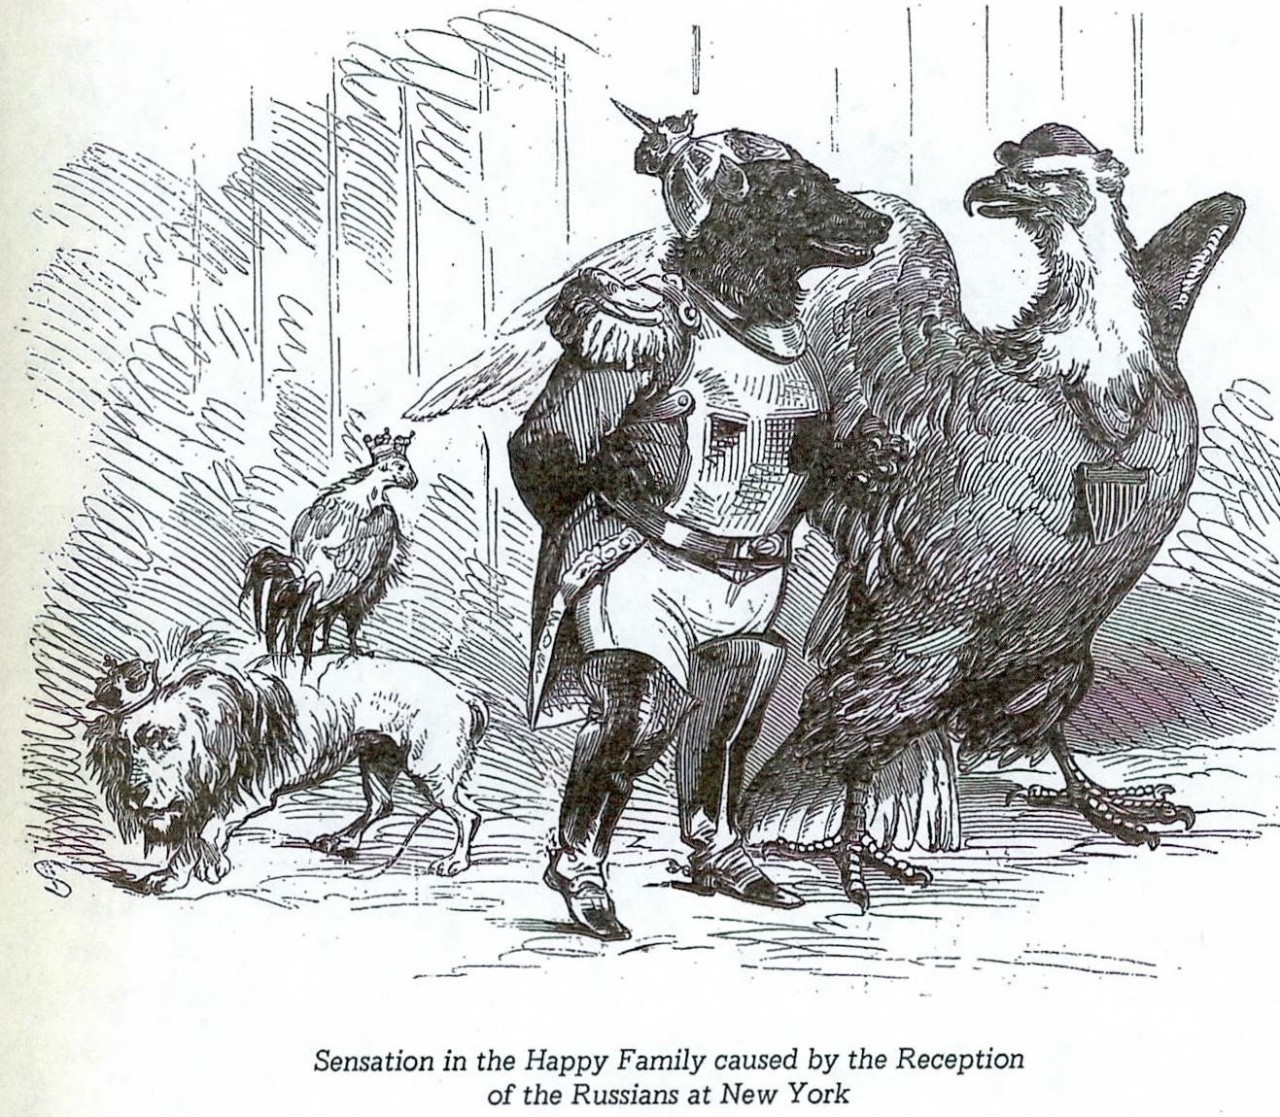 Sensation in the Happy Family caused by the Reception of the Russians at New York